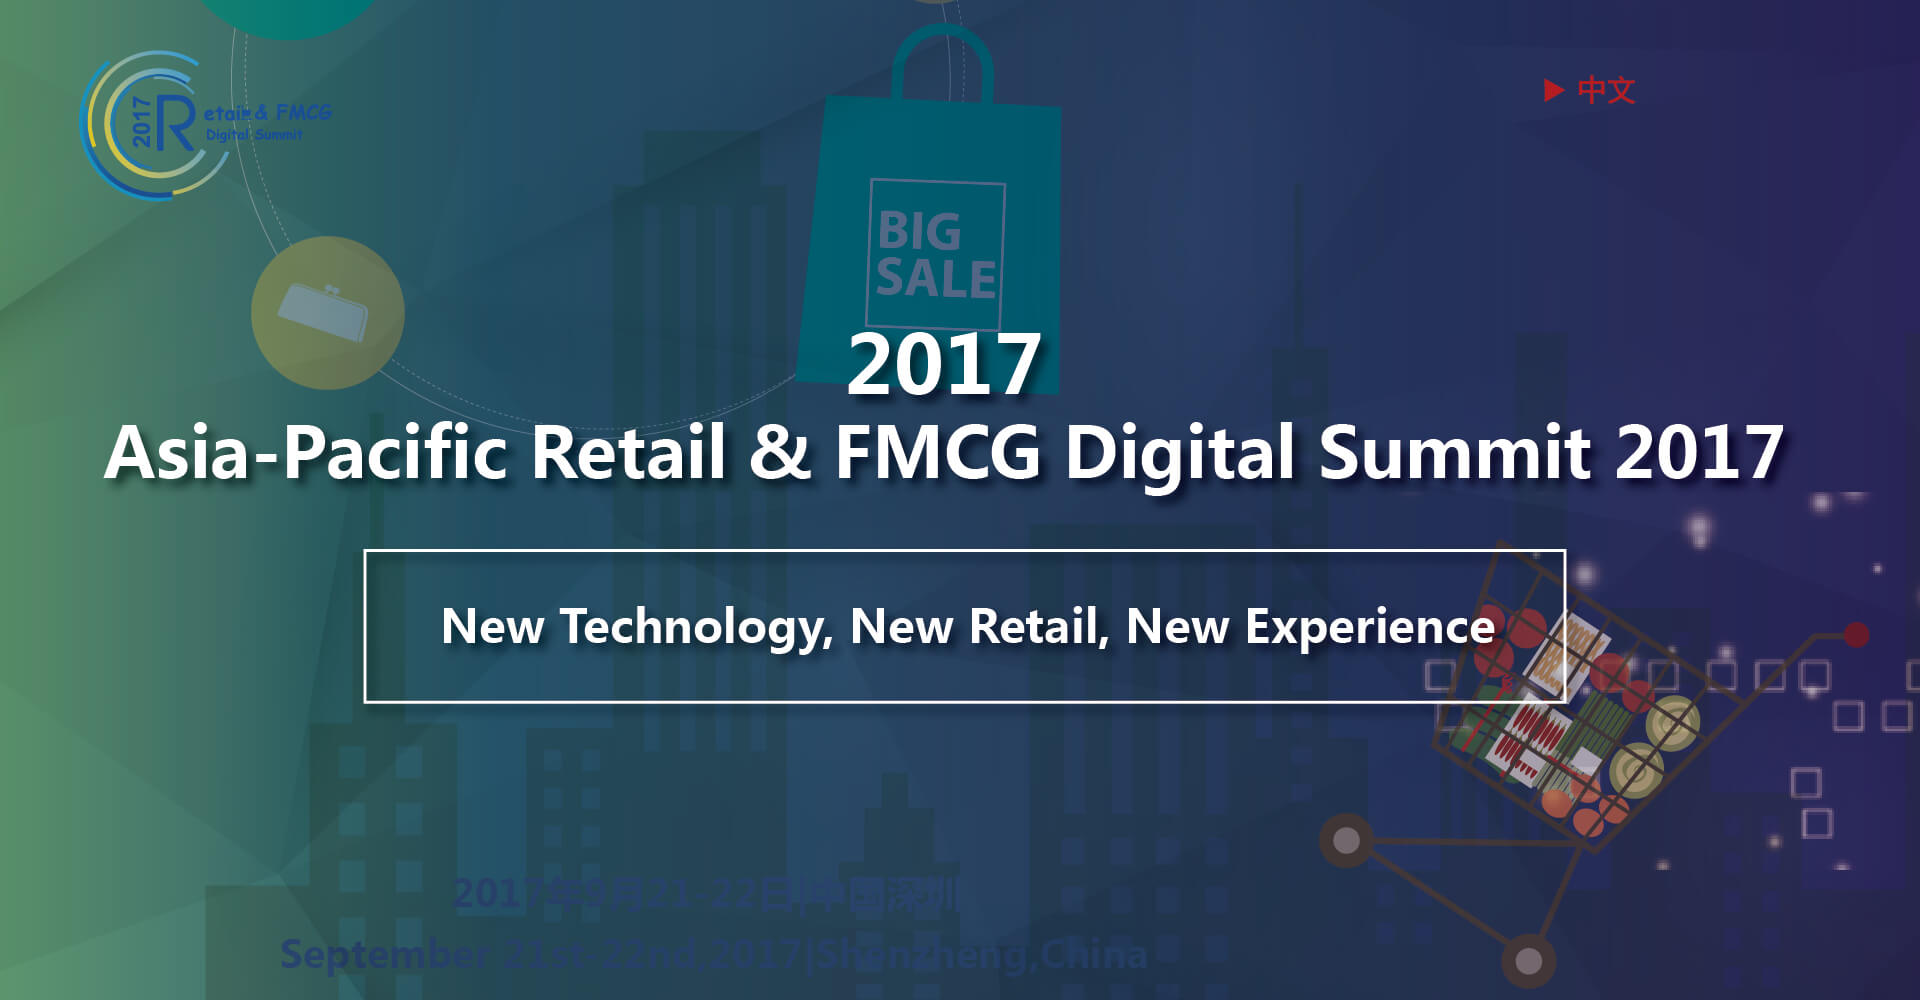 Asia-Pacific Retail and FMCG Digital Summit 2017